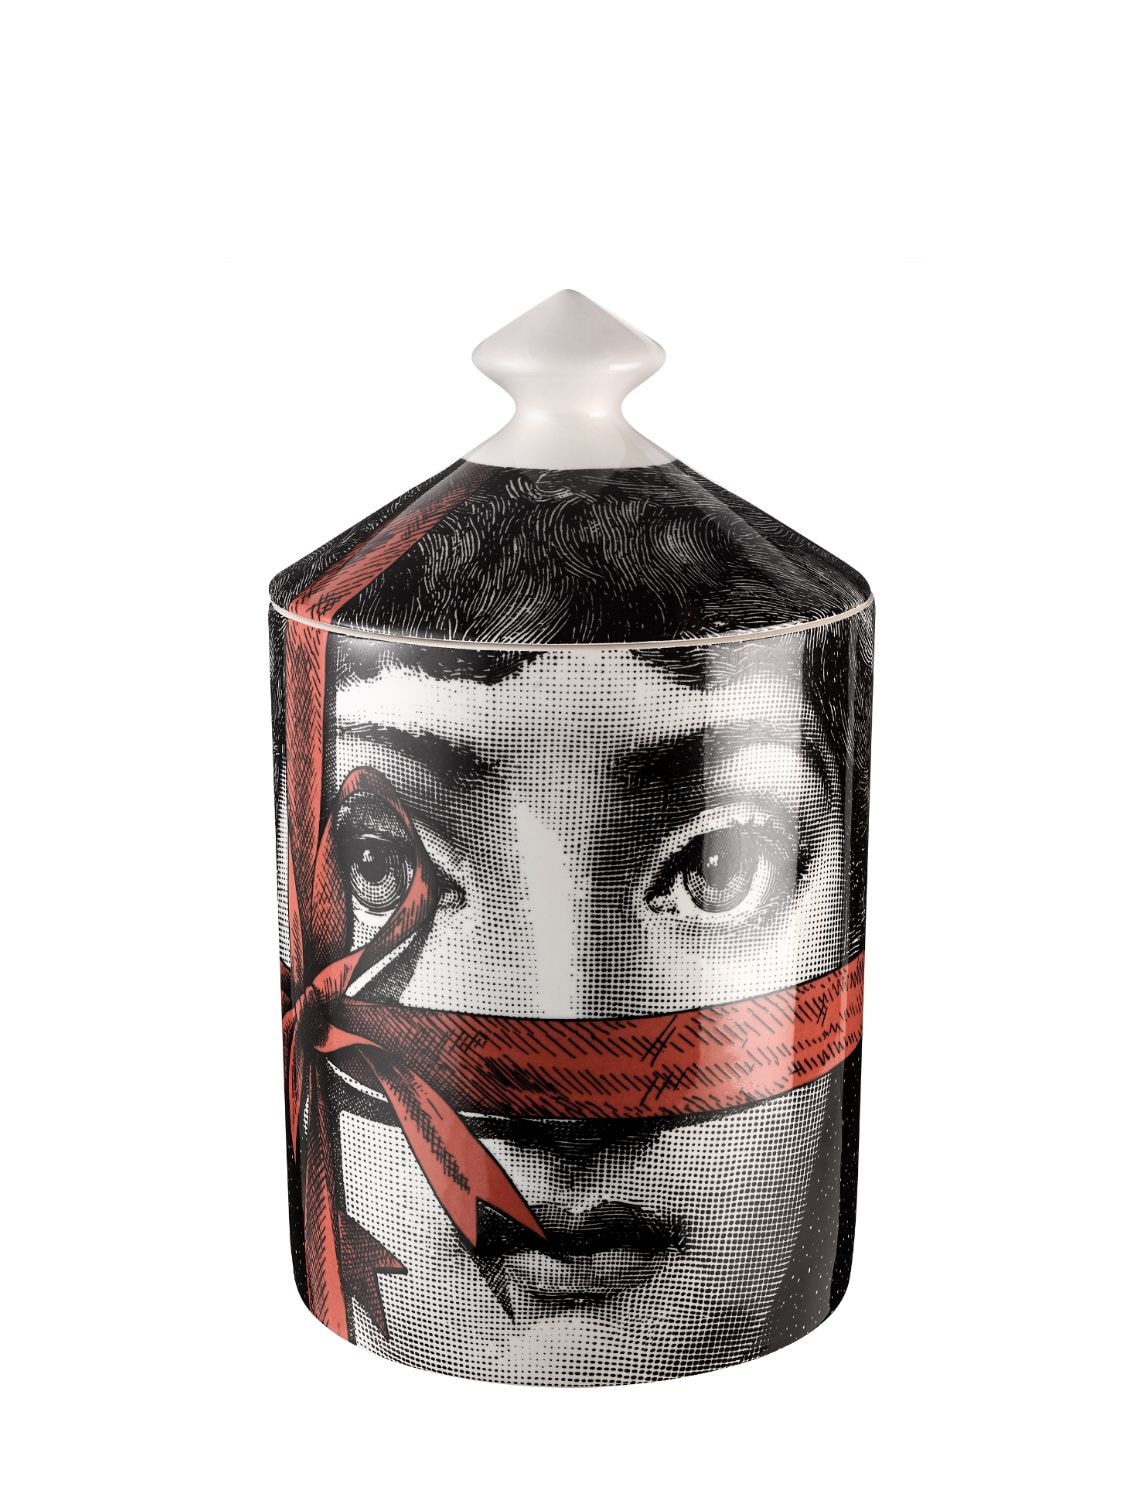 FORNASETTI REGALO FLORA SCENTED CANDLE WITH LID,69I9N0005-TVVMVELDT0XPUG2